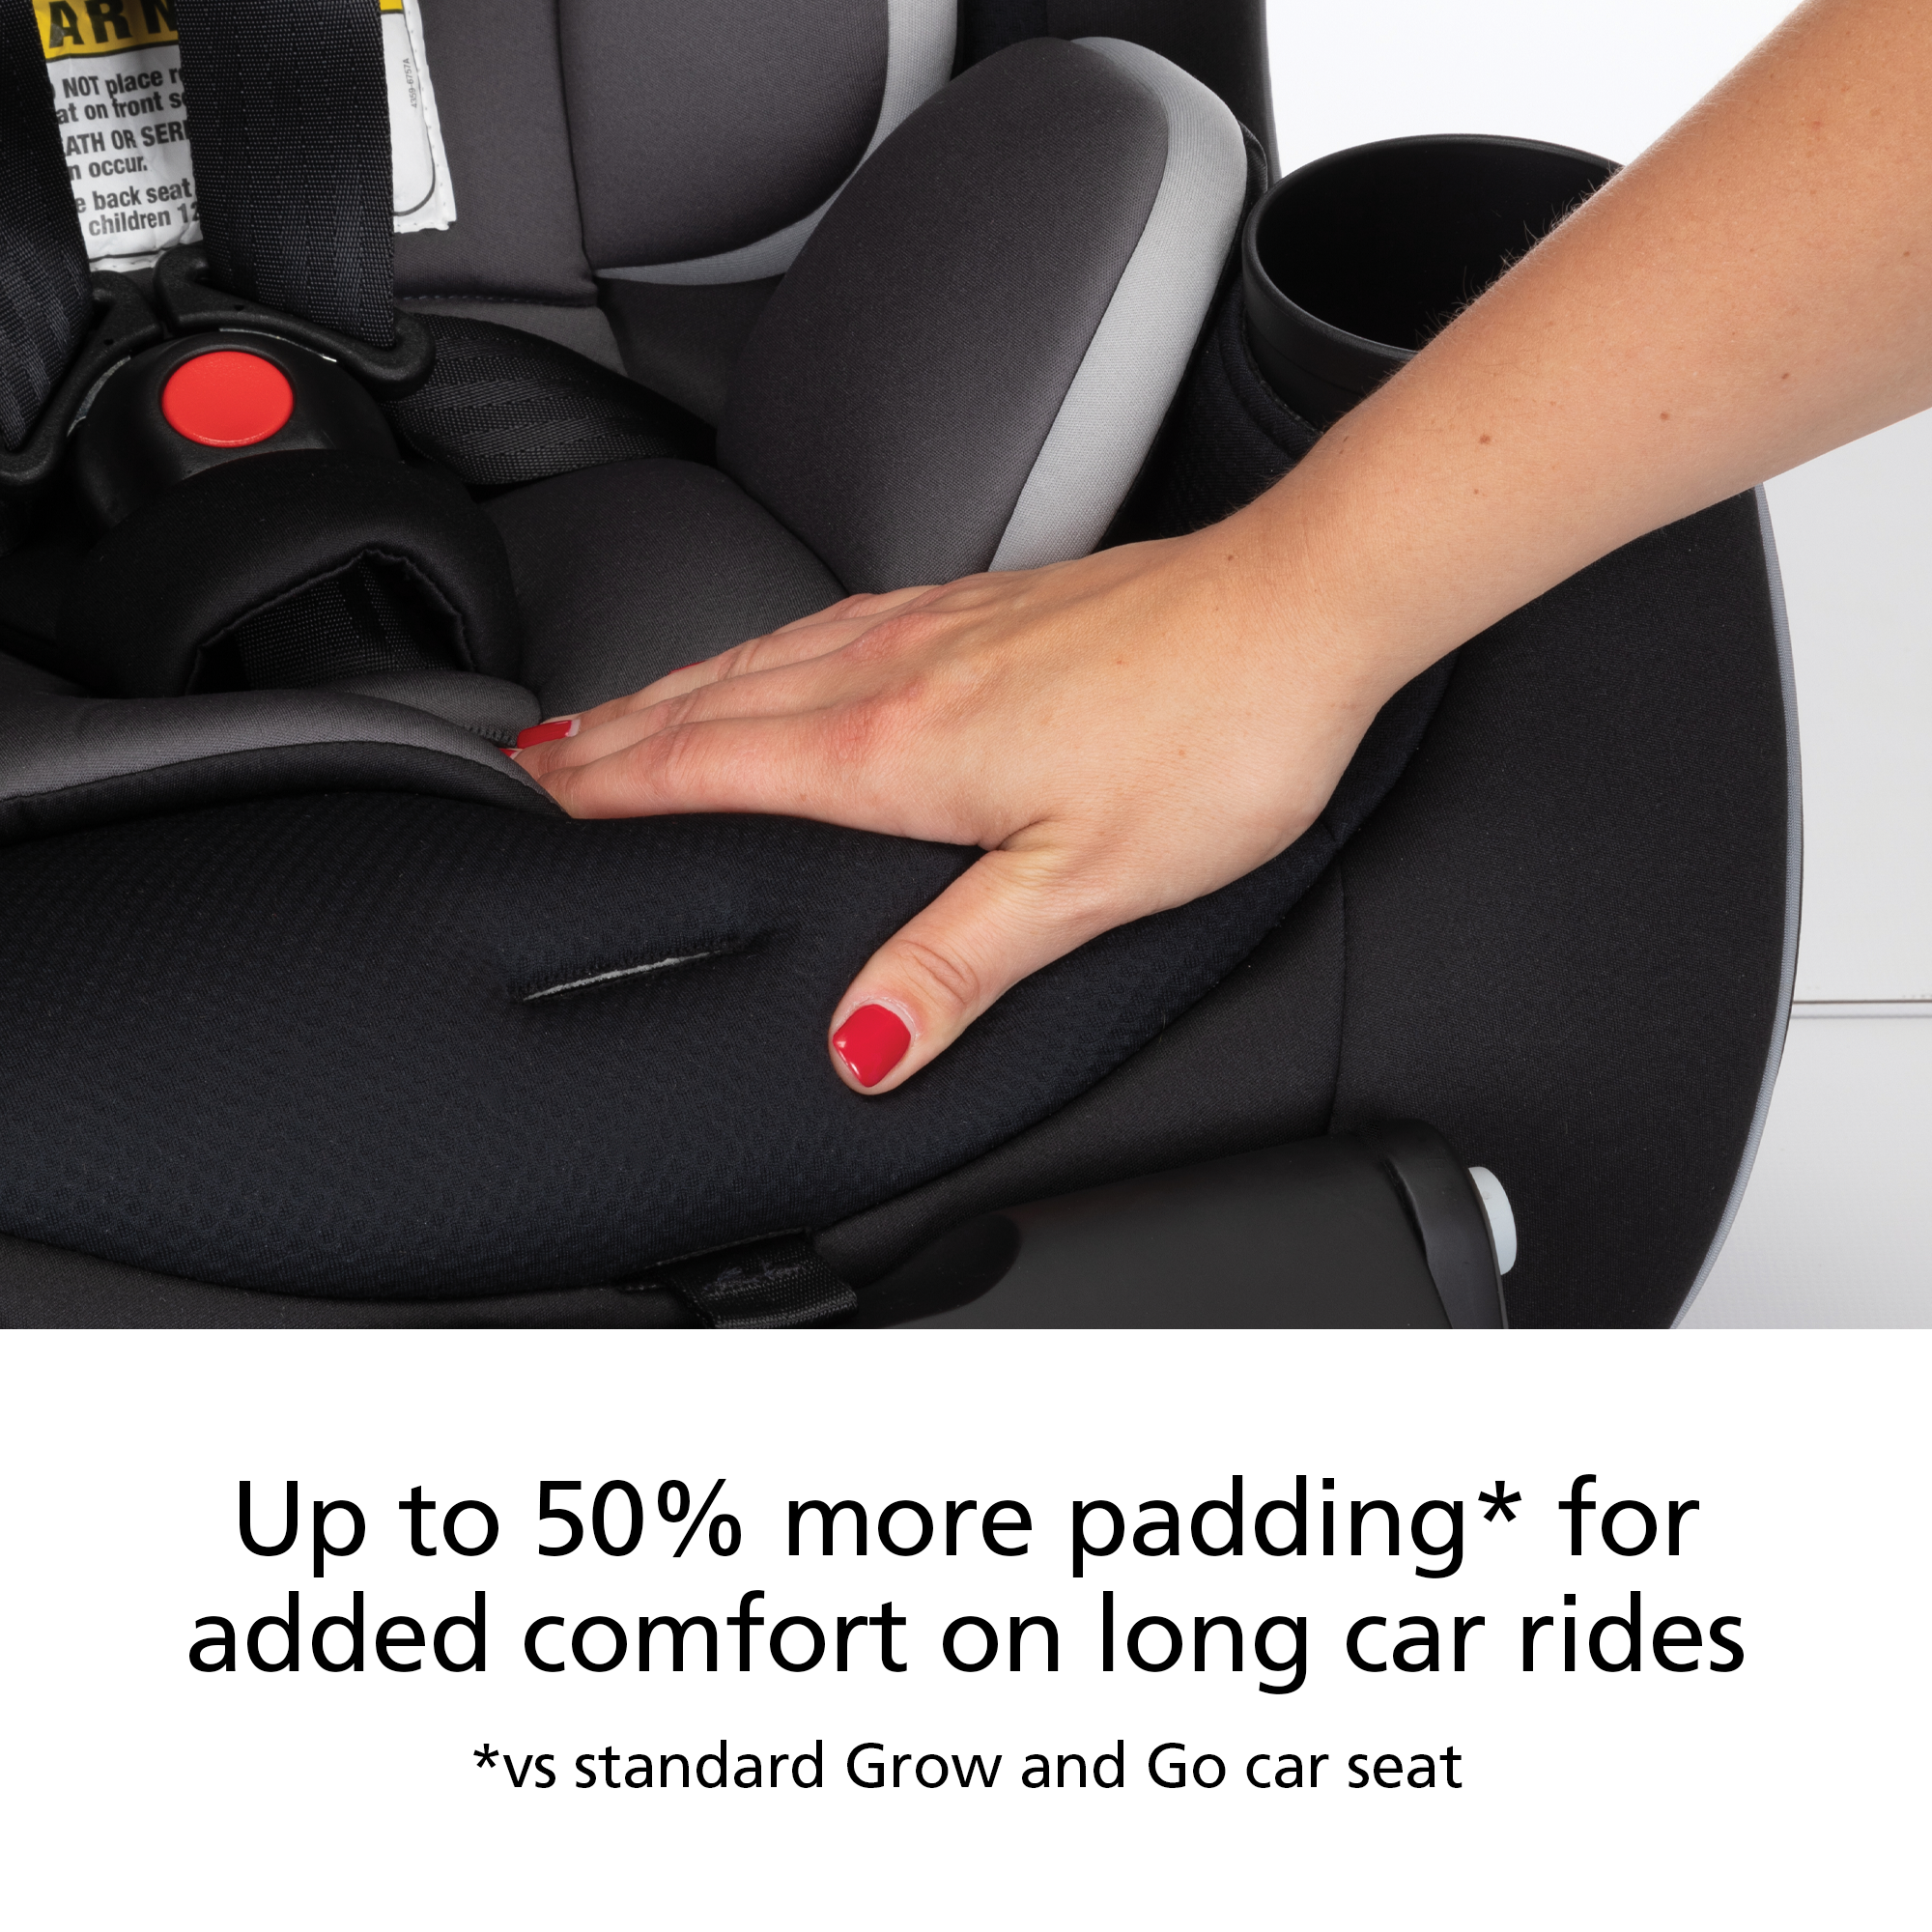 Grow and Go™ Extend 'n Ride LX - up to 5% more padding for added comfort on long car rides